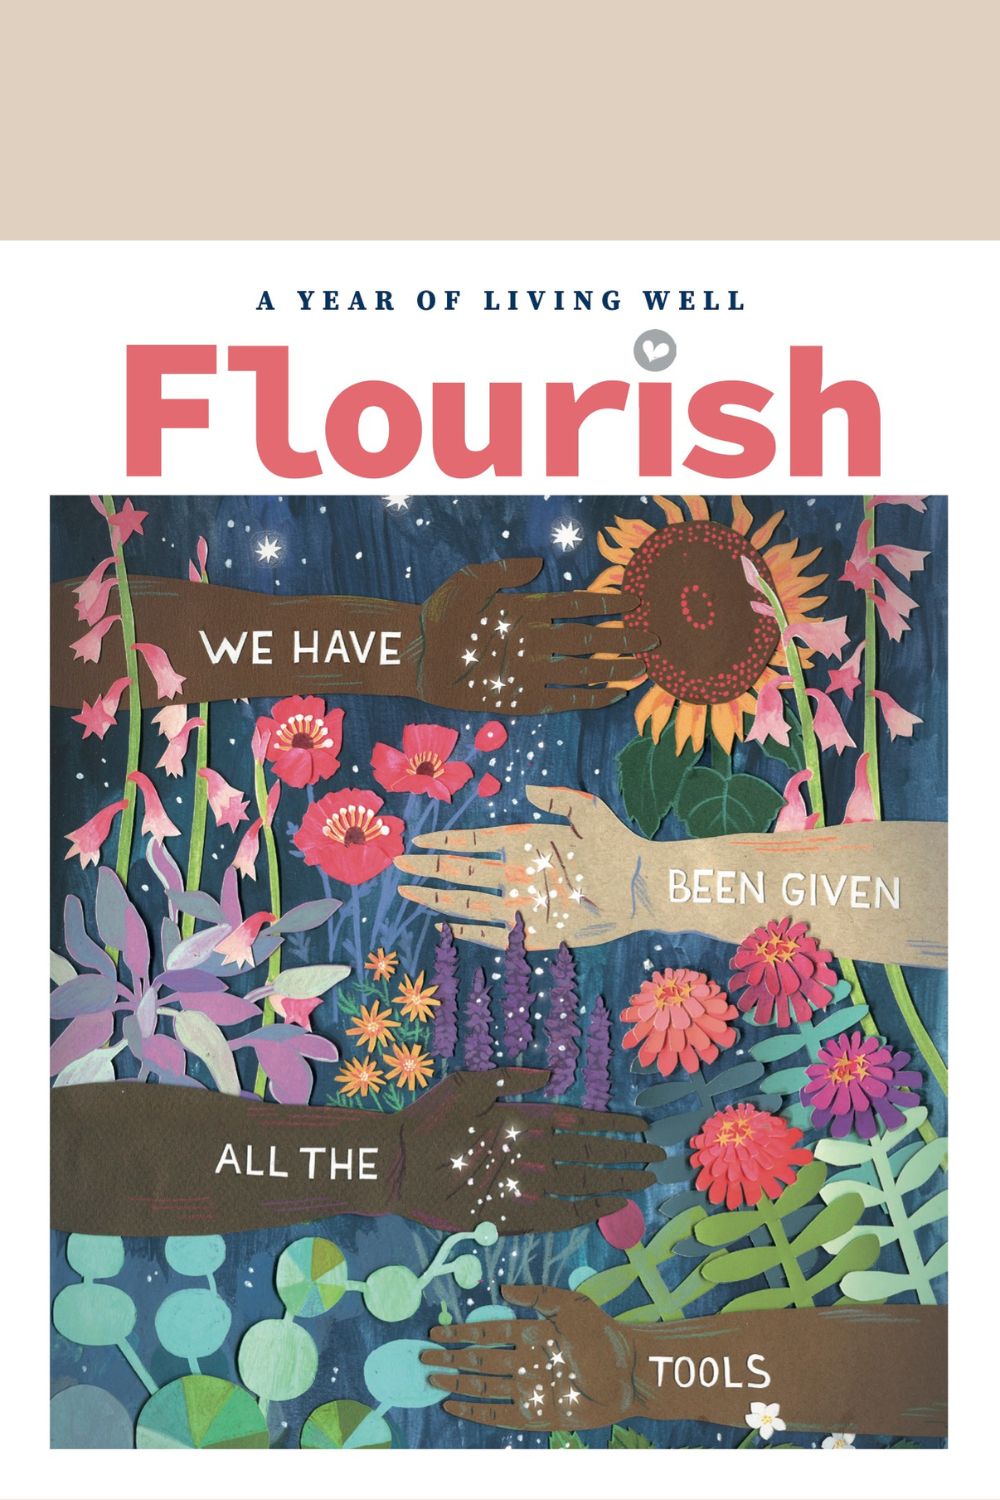 Flourish - A Year of Living Well